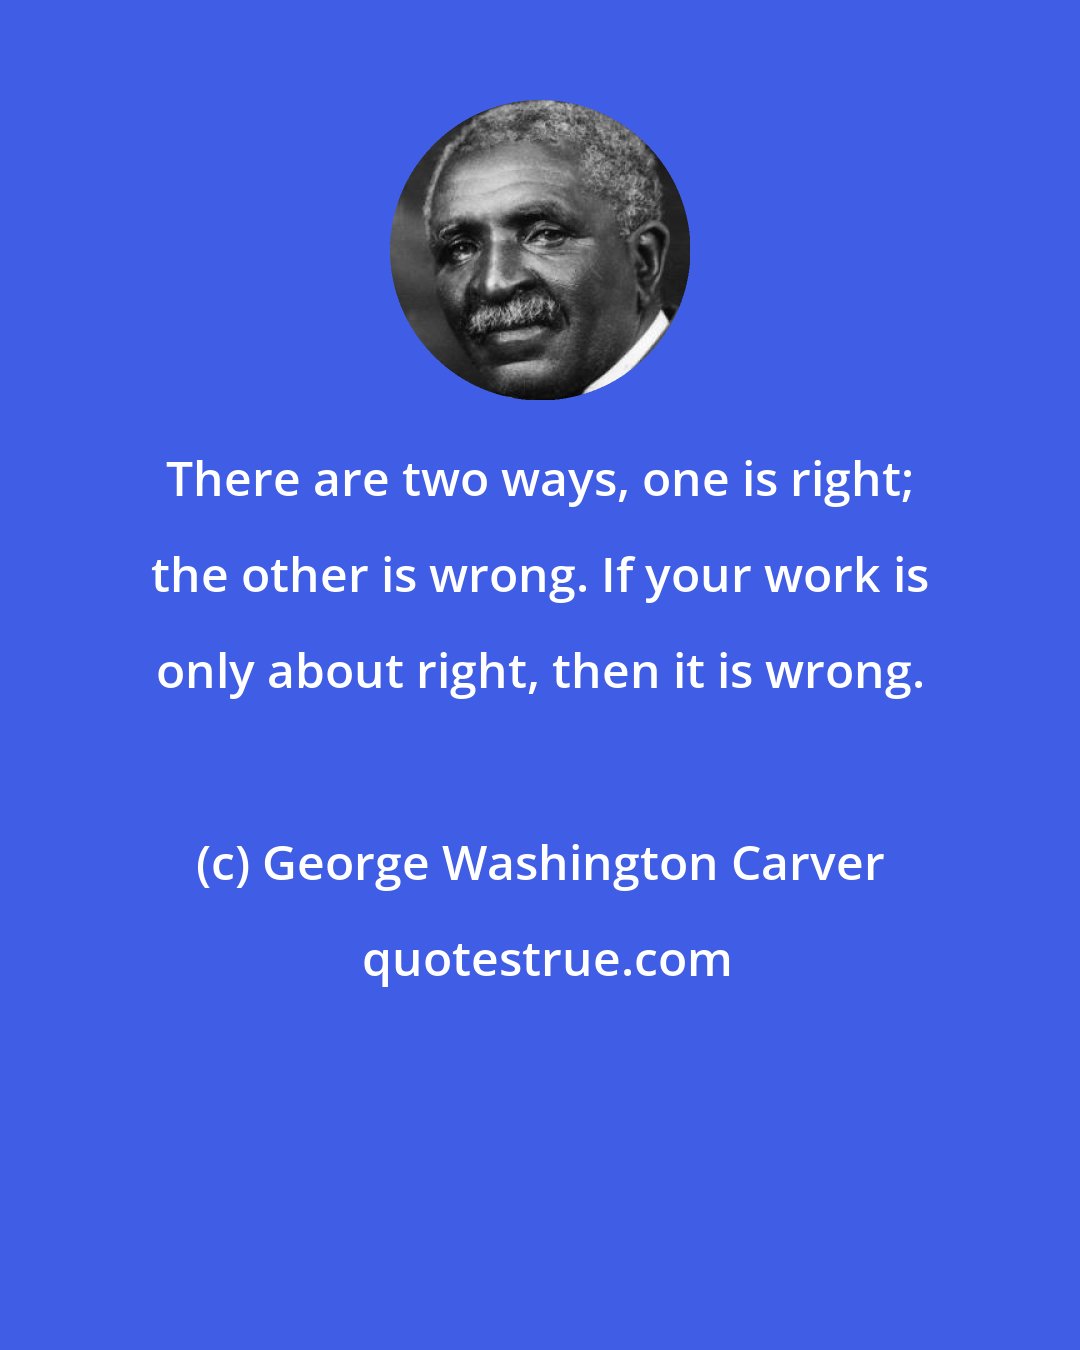 George Washington Carver: There are two ways, one is right; the other is wrong. If your work is only about right, then it is wrong.